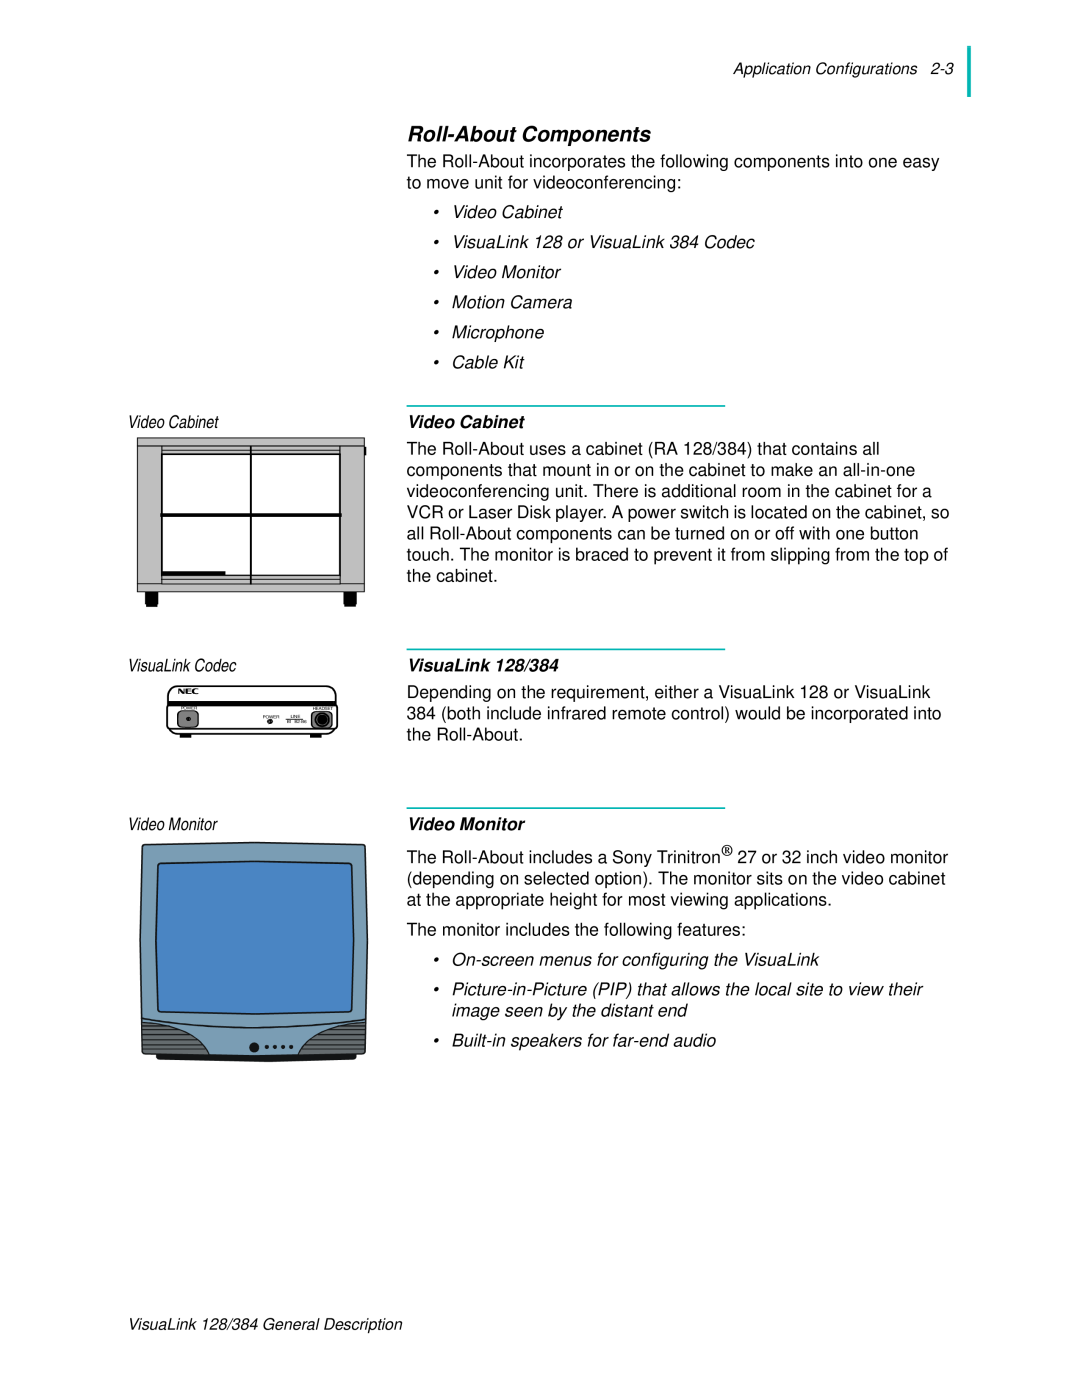 NEC manual Roll-AboutComponents, Video Cabinet, VisuaLink 128/384, Video Monitor 